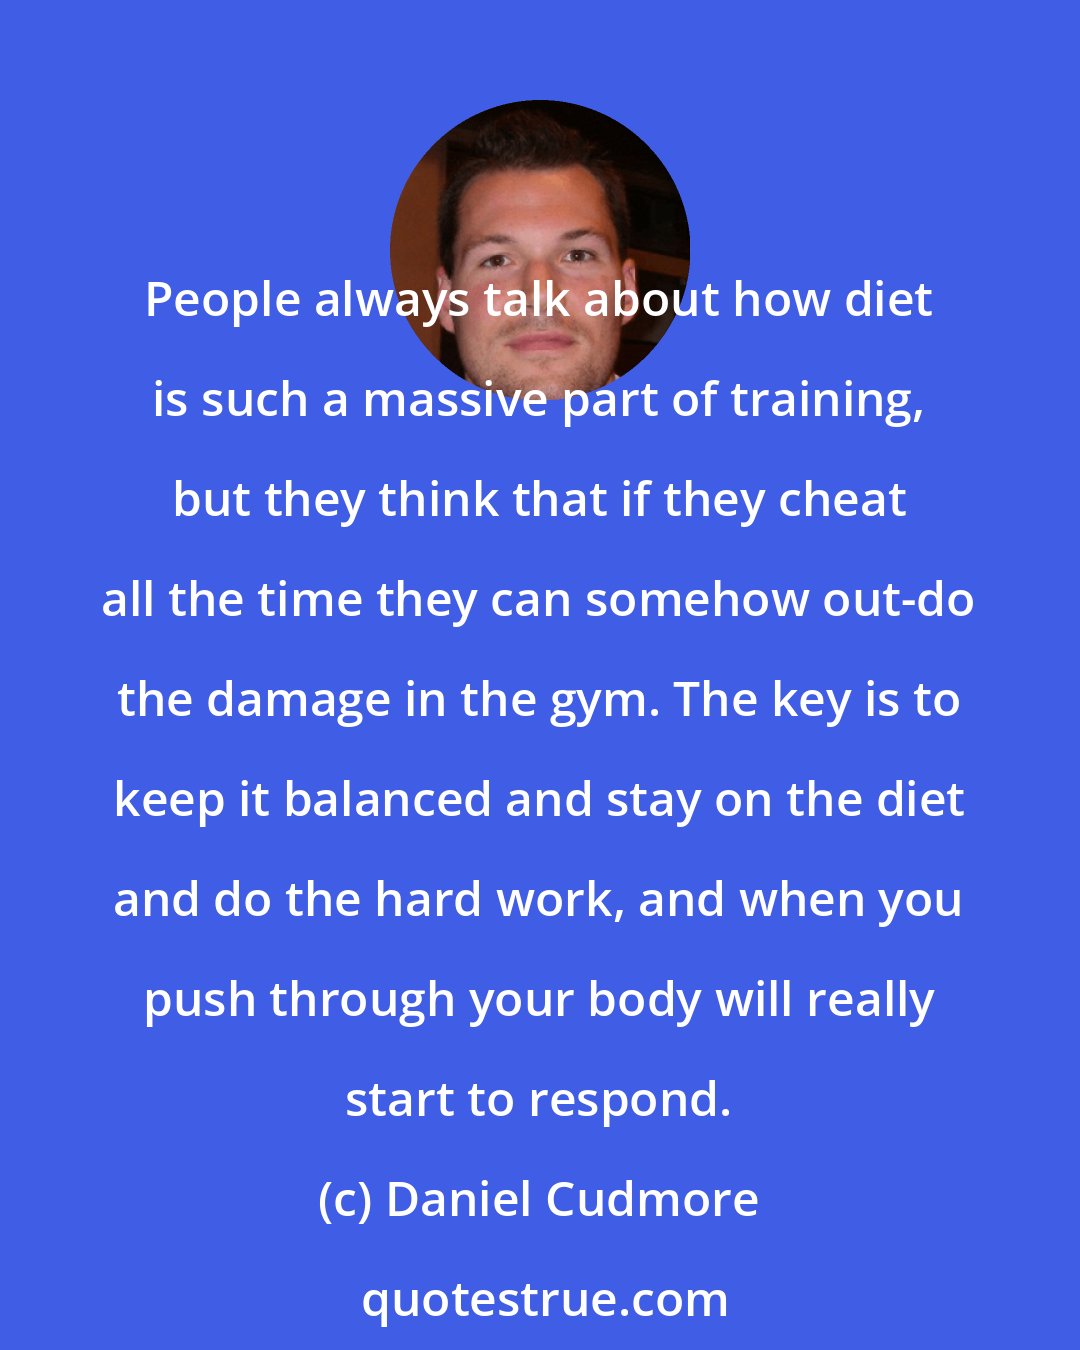 Daniel Cudmore: People always talk about how diet is such a massive part of training, but they think that if they cheat all the time they can somehow out-do the damage in the gym. The key is to keep it balanced and stay on the diet and do the hard work, and when you push through your body will really start to respond.